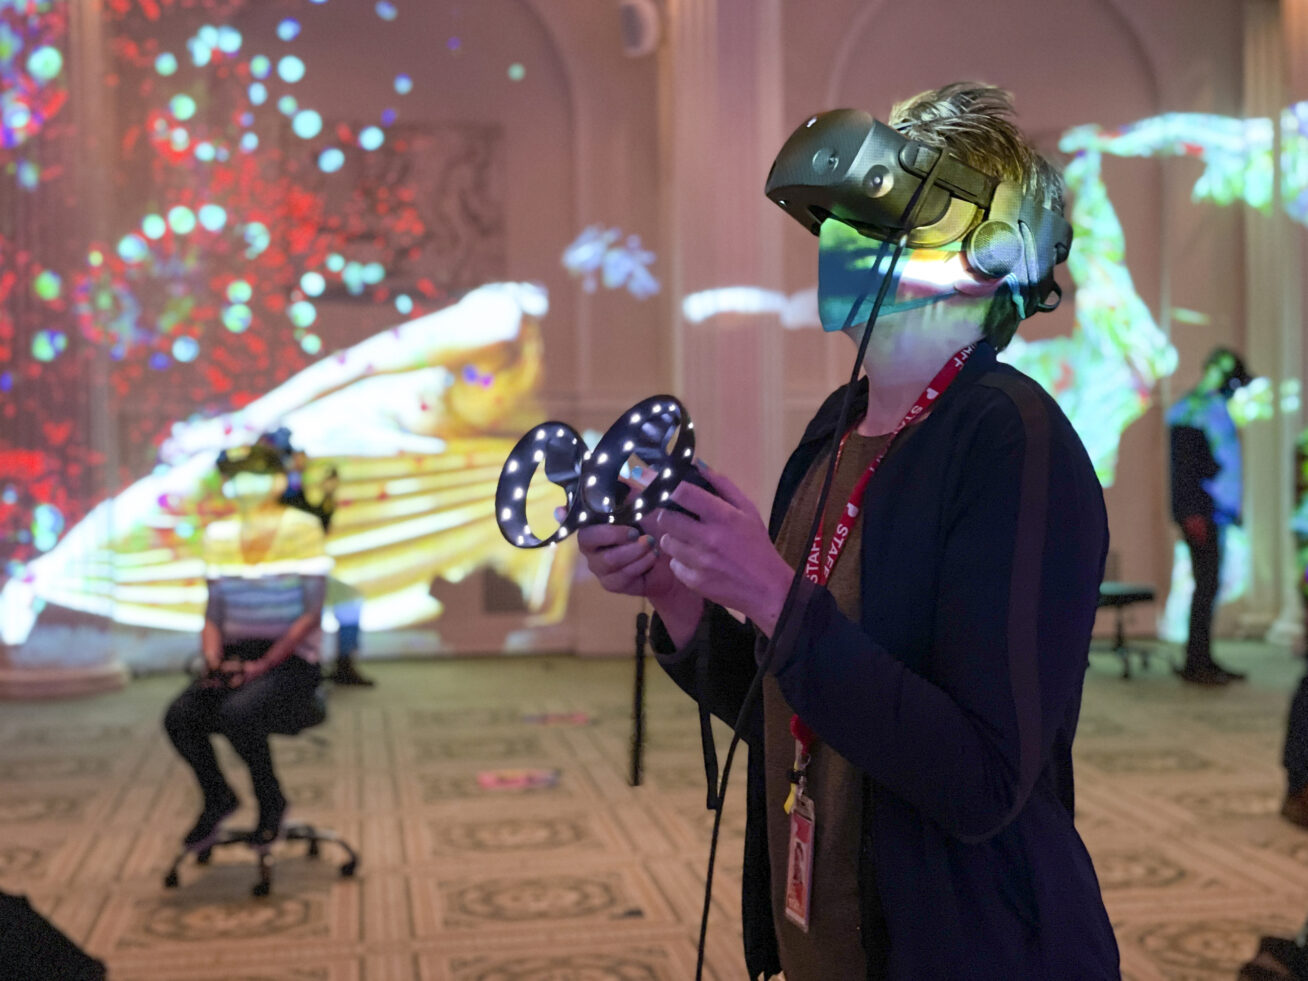 Photo of a person in a colorfully lit room using a VR headset and handset.